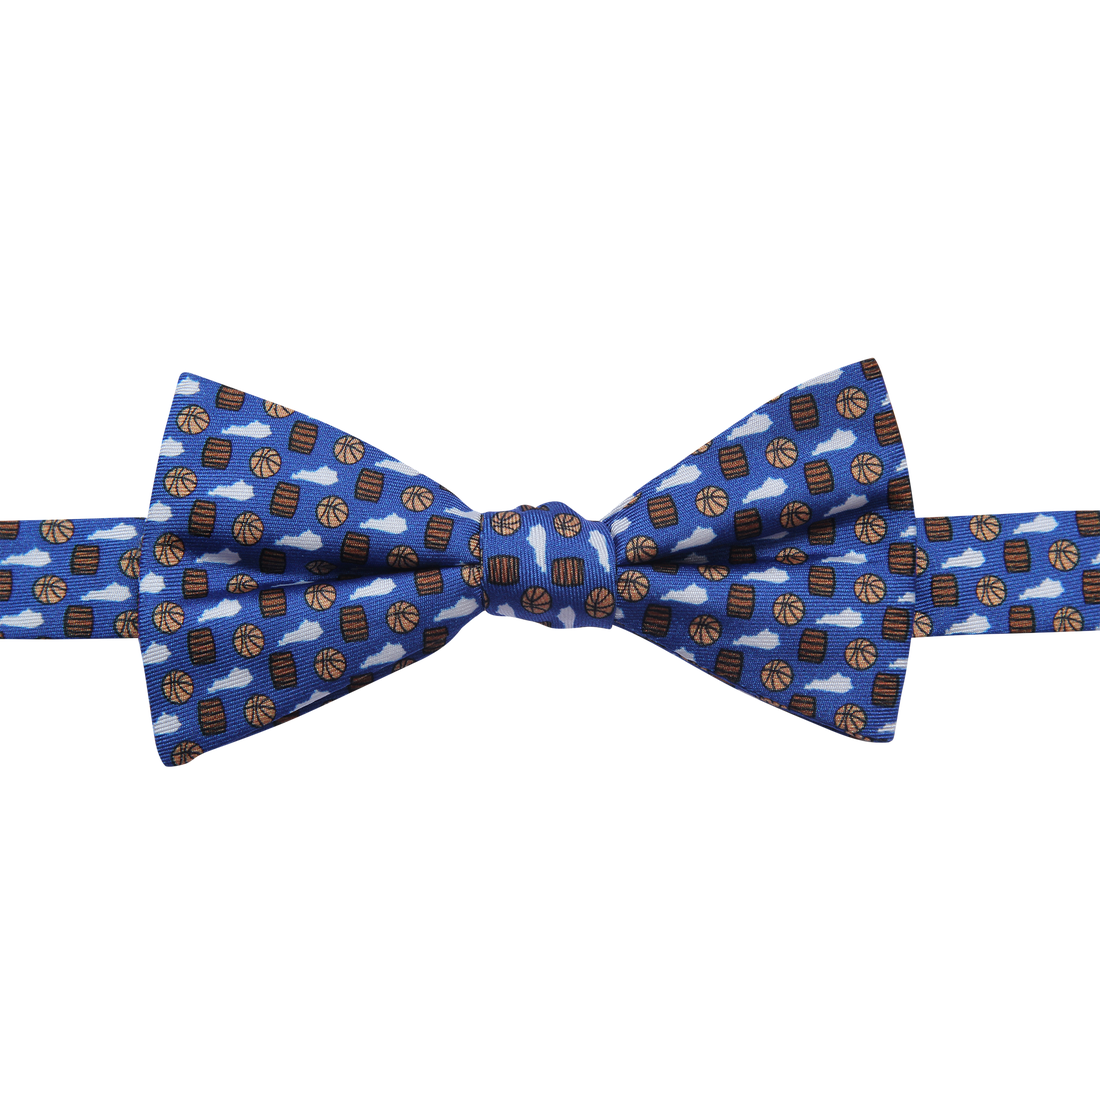 Blue KY Traditions Bowtie